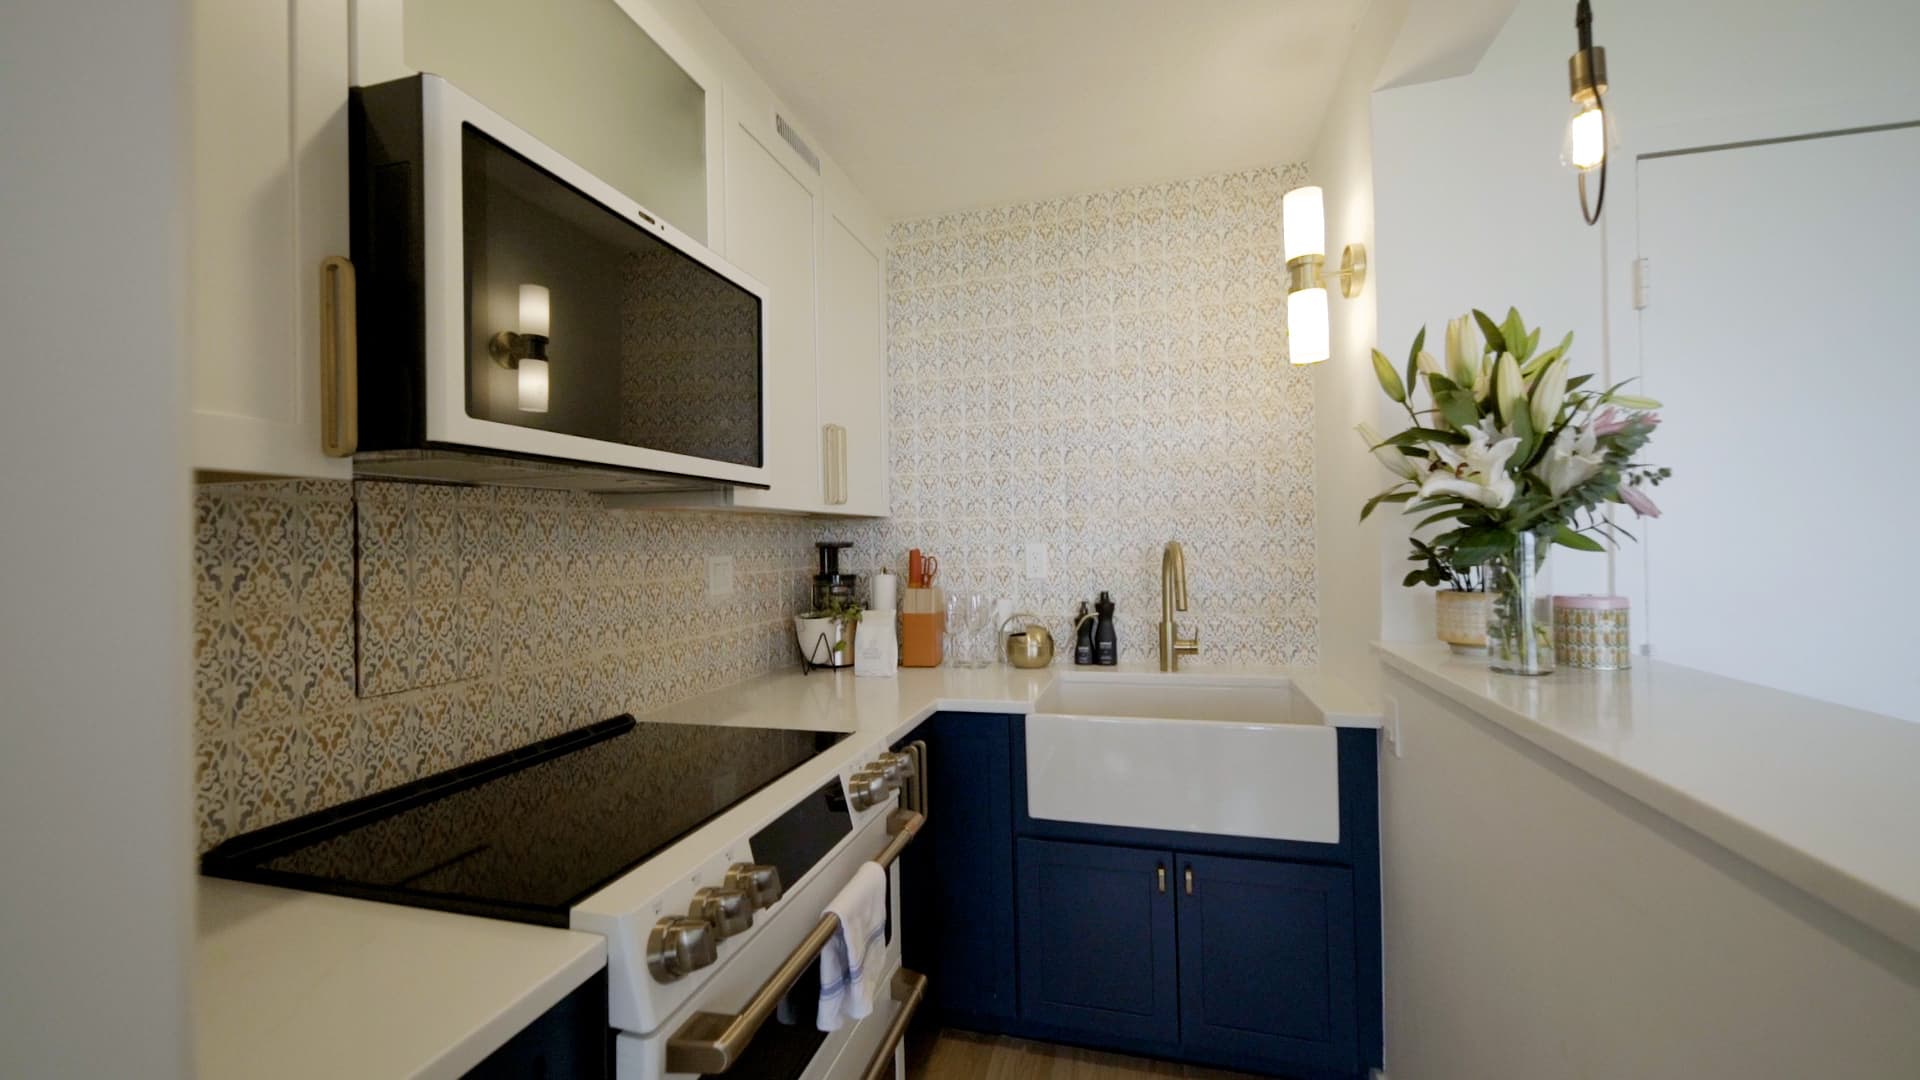 The tiles on the kitchen backsplash are a splurge that Nabongo purchased from Spain.